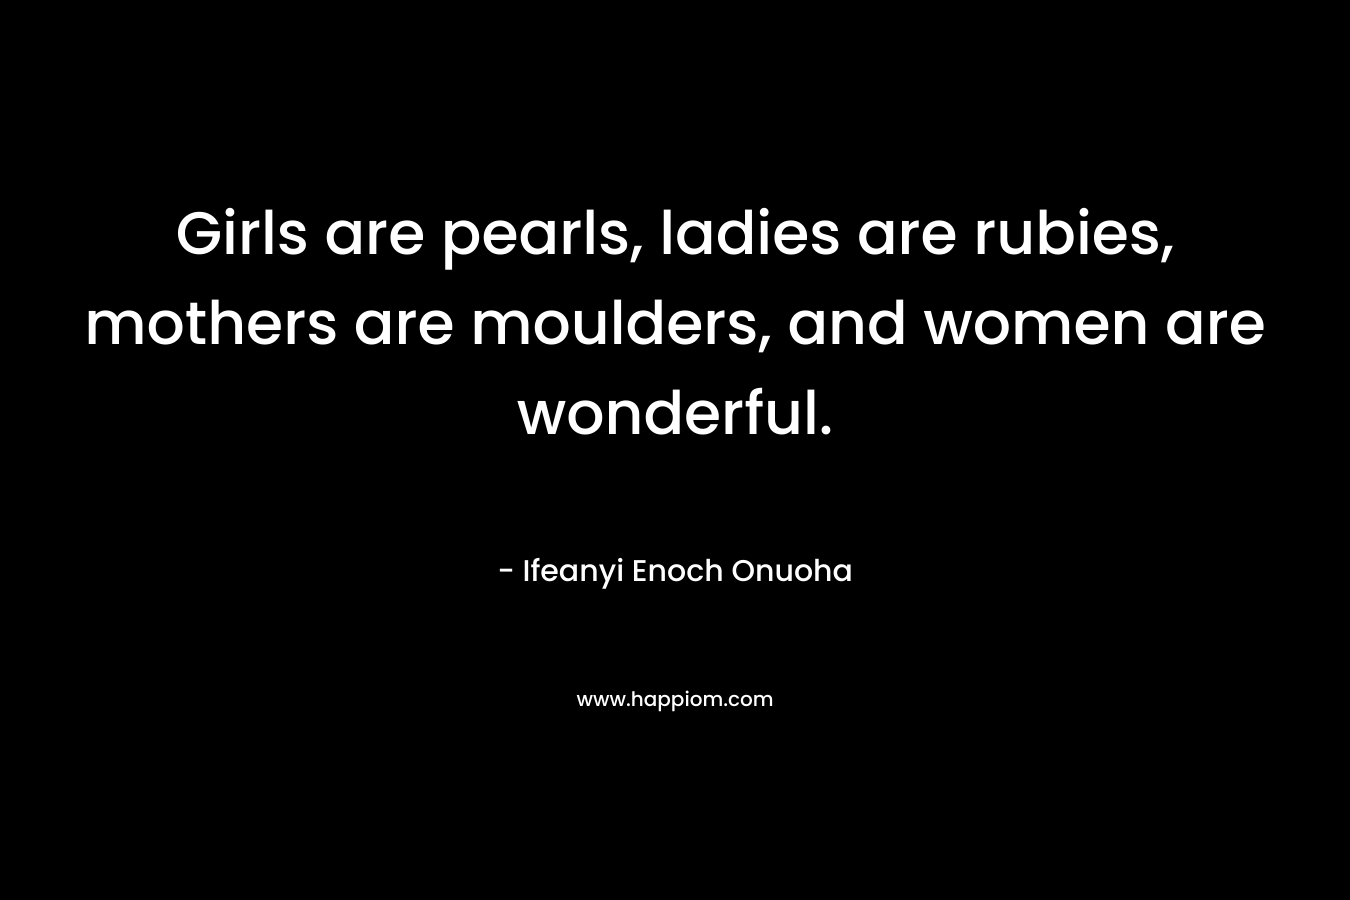 Girls are pearls, ladies are rubies, mothers are moulders, and women are wonderful. – Ifeanyi Enoch Onuoha